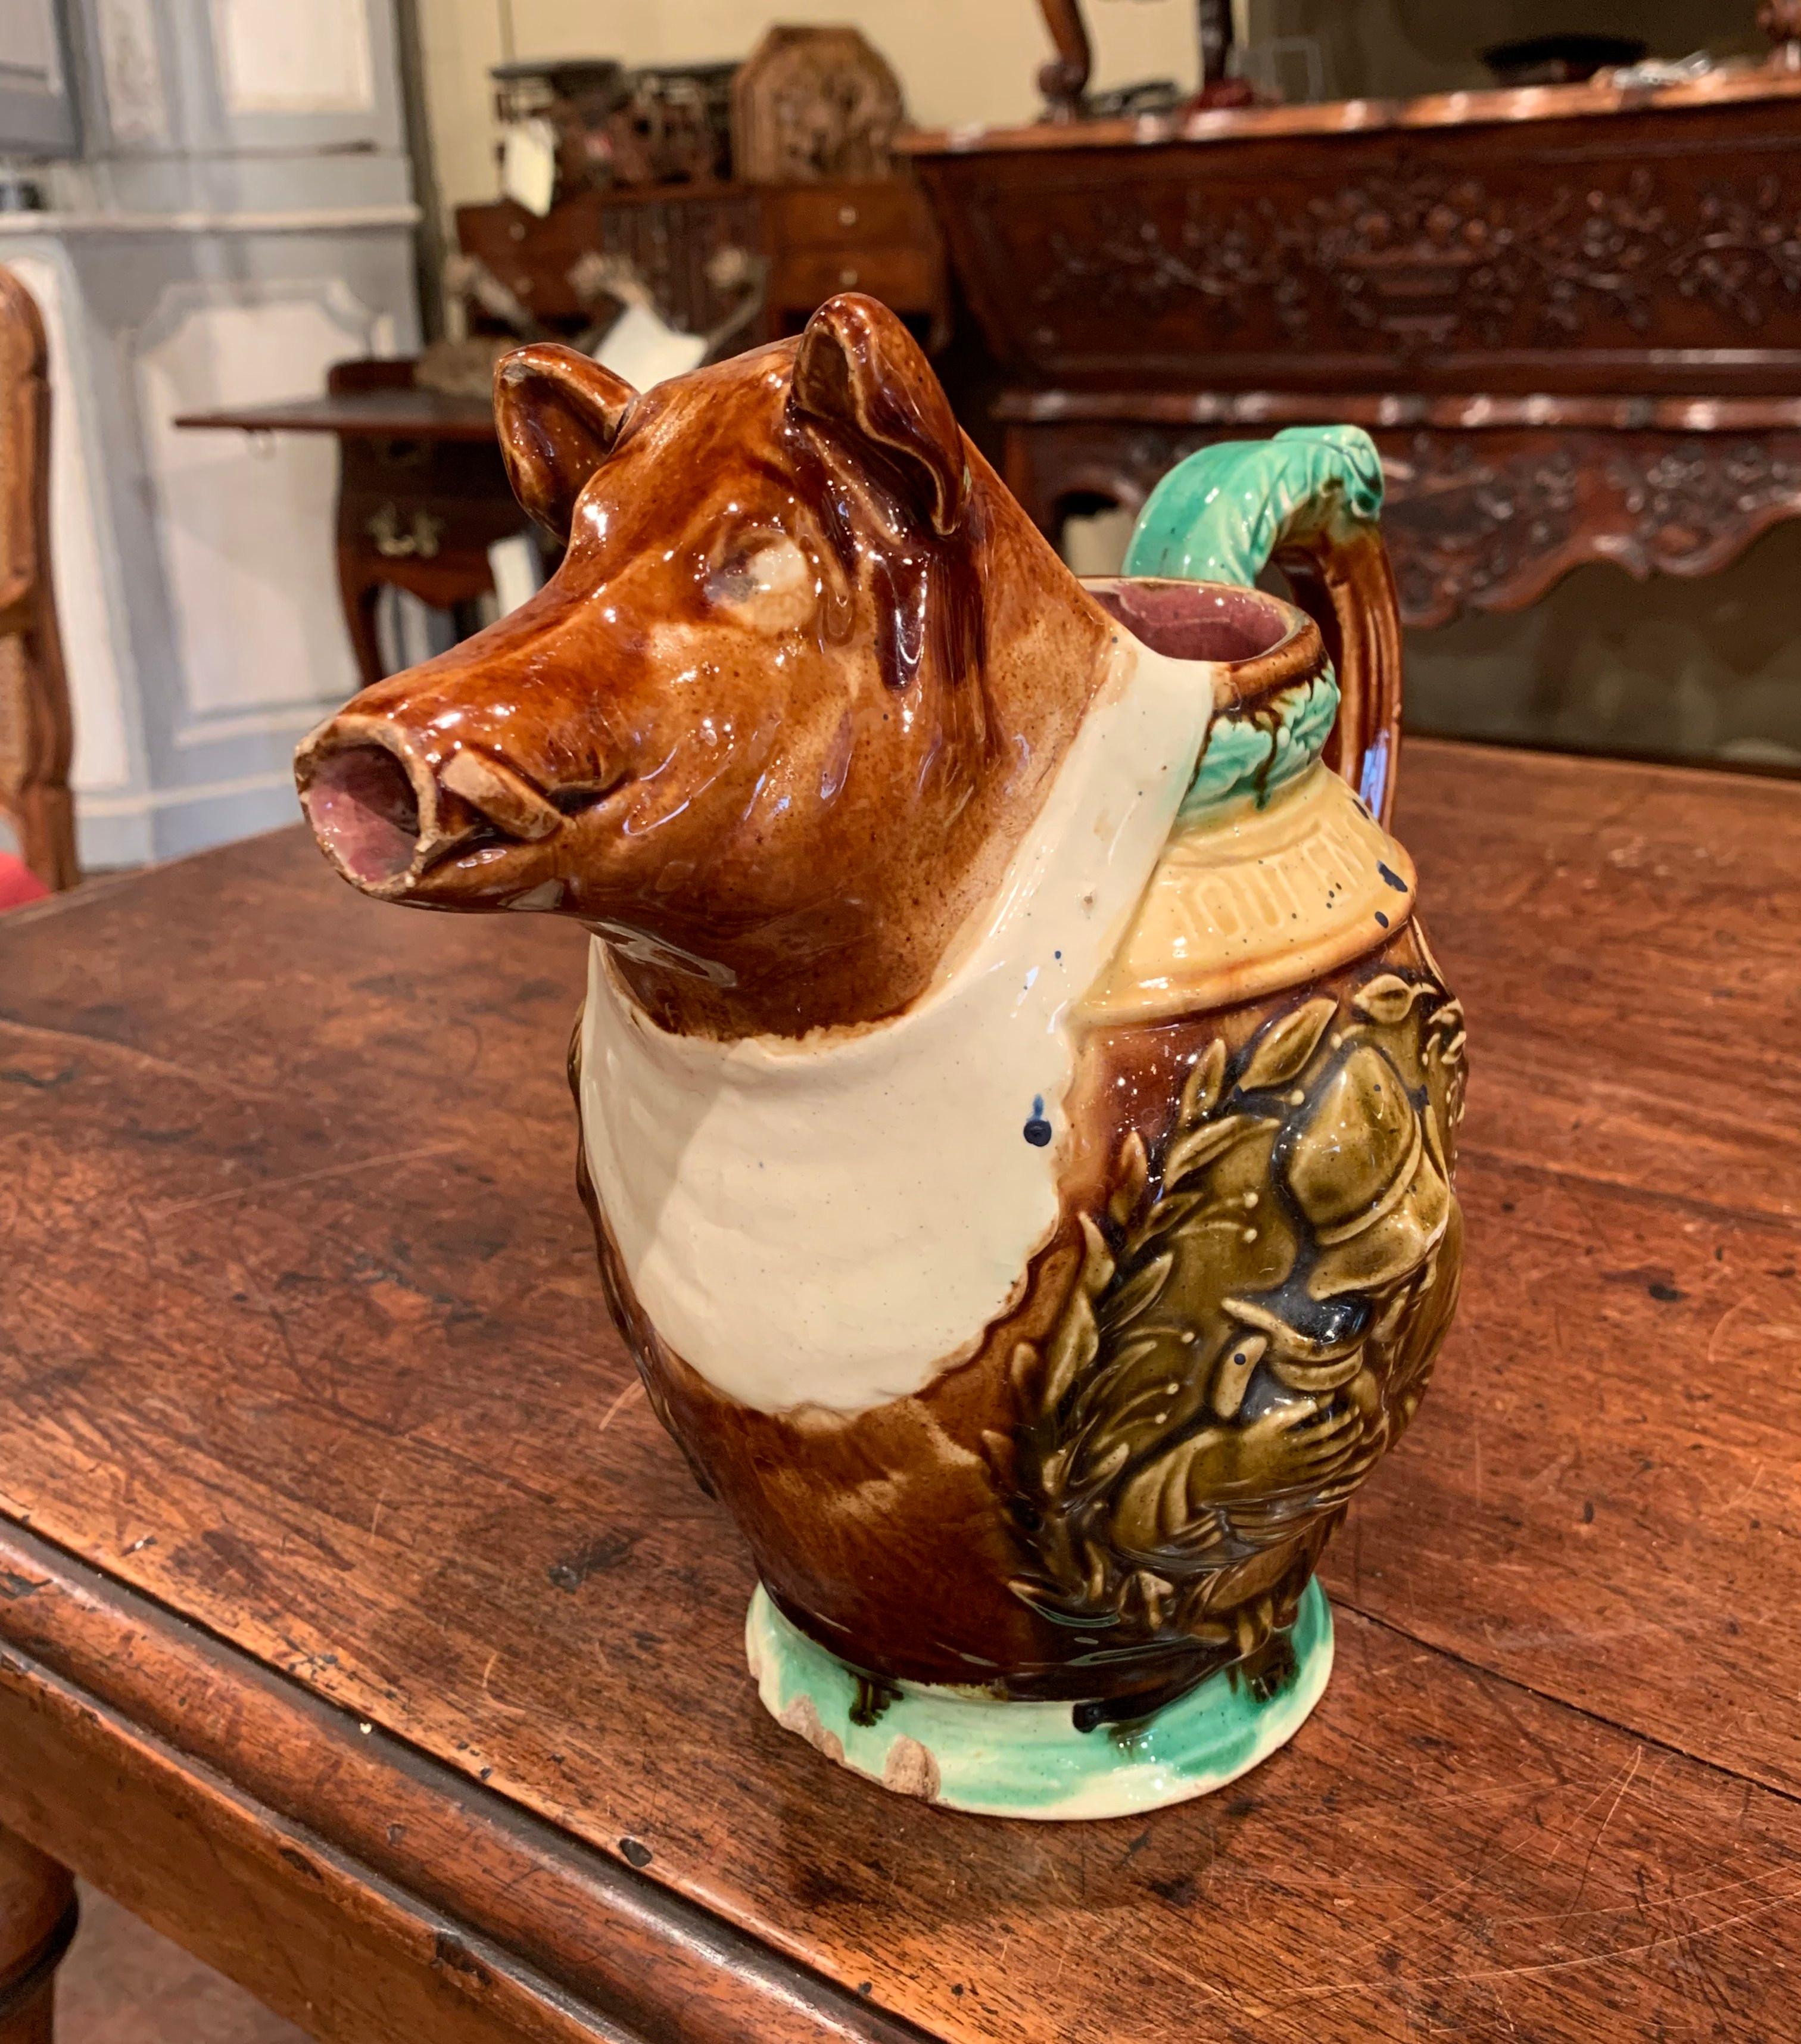 Porcelain collectors will love this colorful, Majolica water pitcher in the shape of a wild boar. Sculpted in France, circa 1890, the artful ceramic jug features a boar sculpture wearing a bib emblazoned with the words 